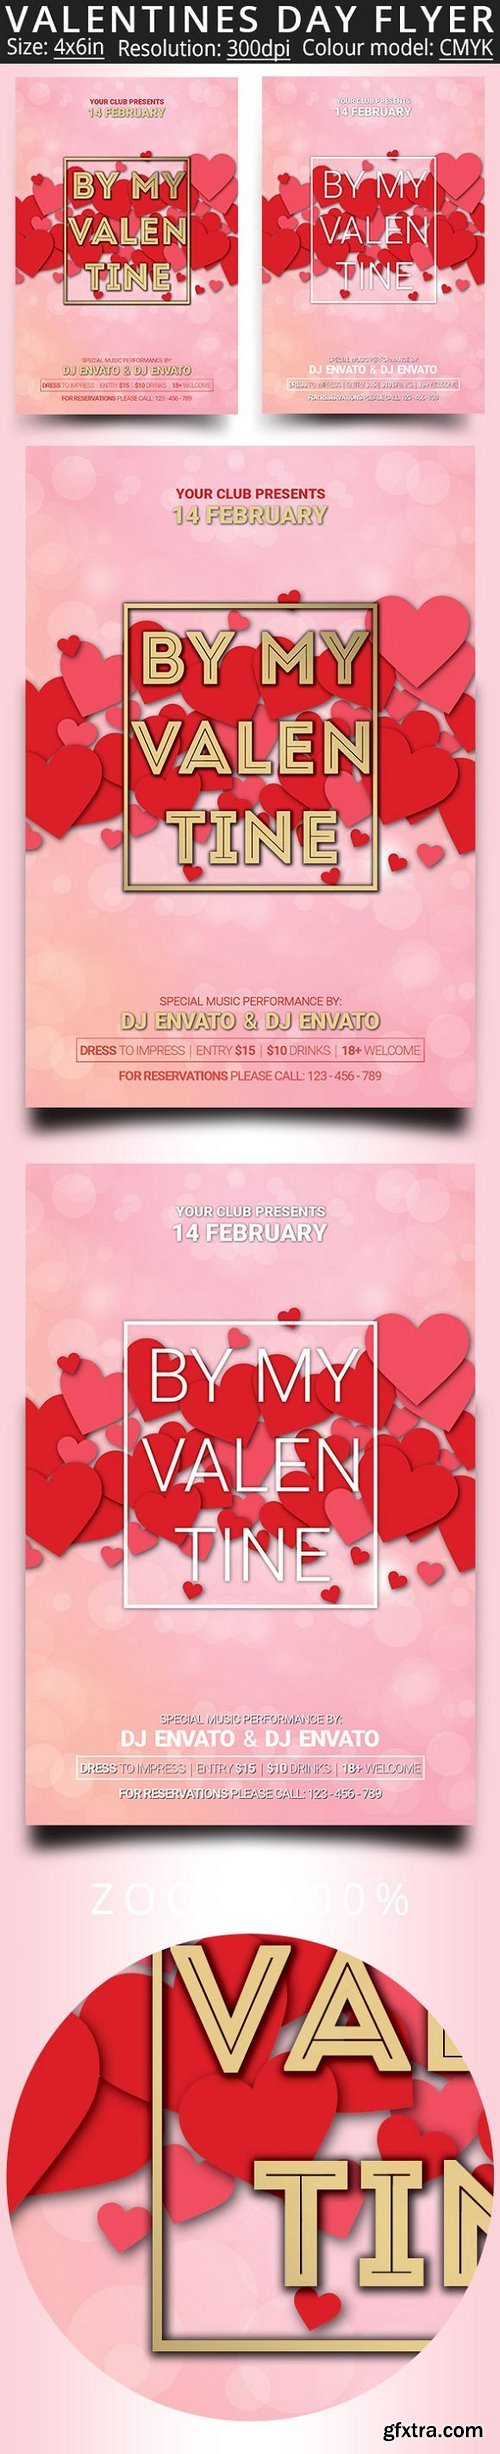 CM - Valentines Day Party Flyer 1163336